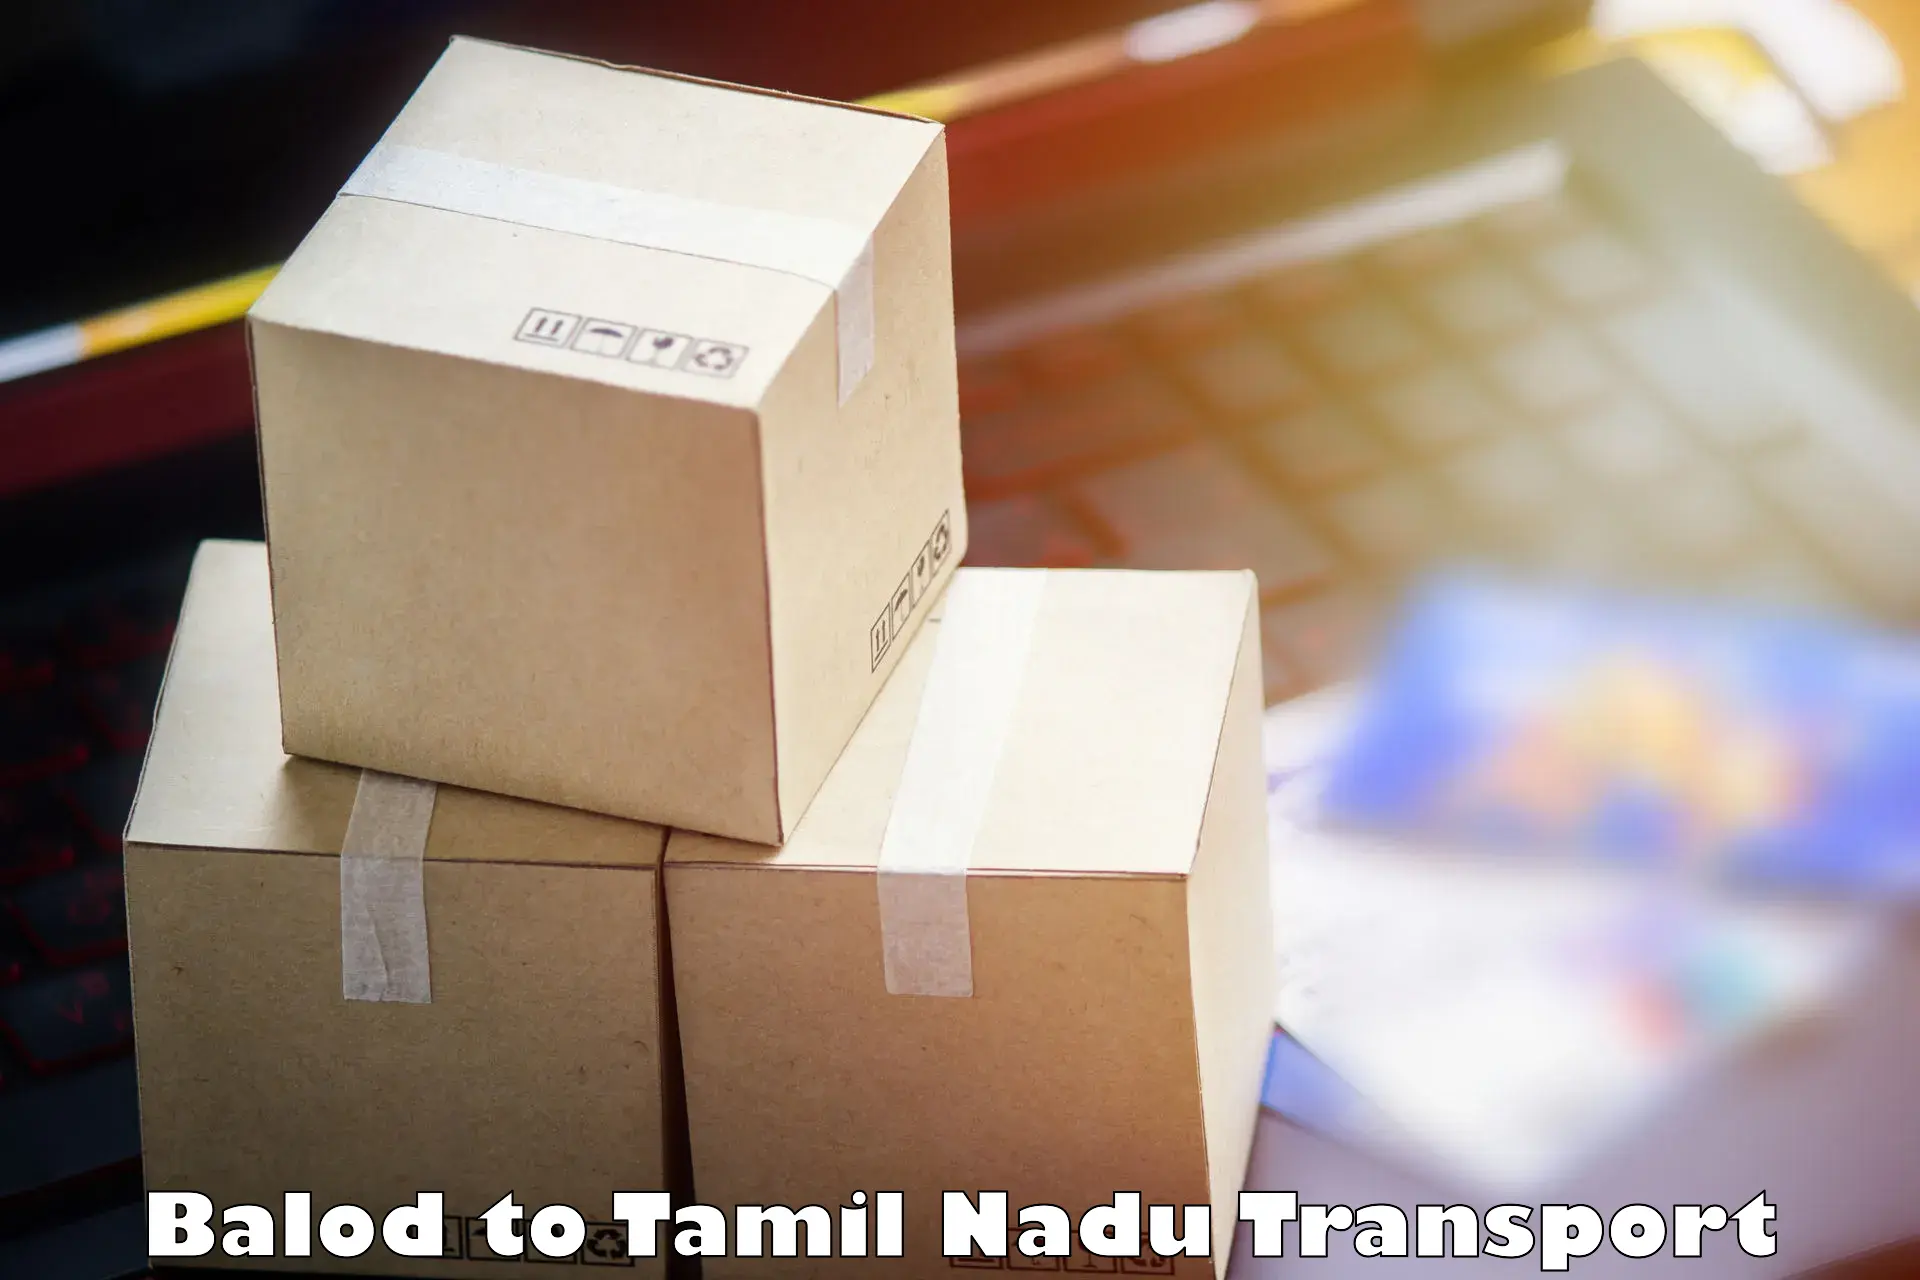 Delivery service Balod to Omalur